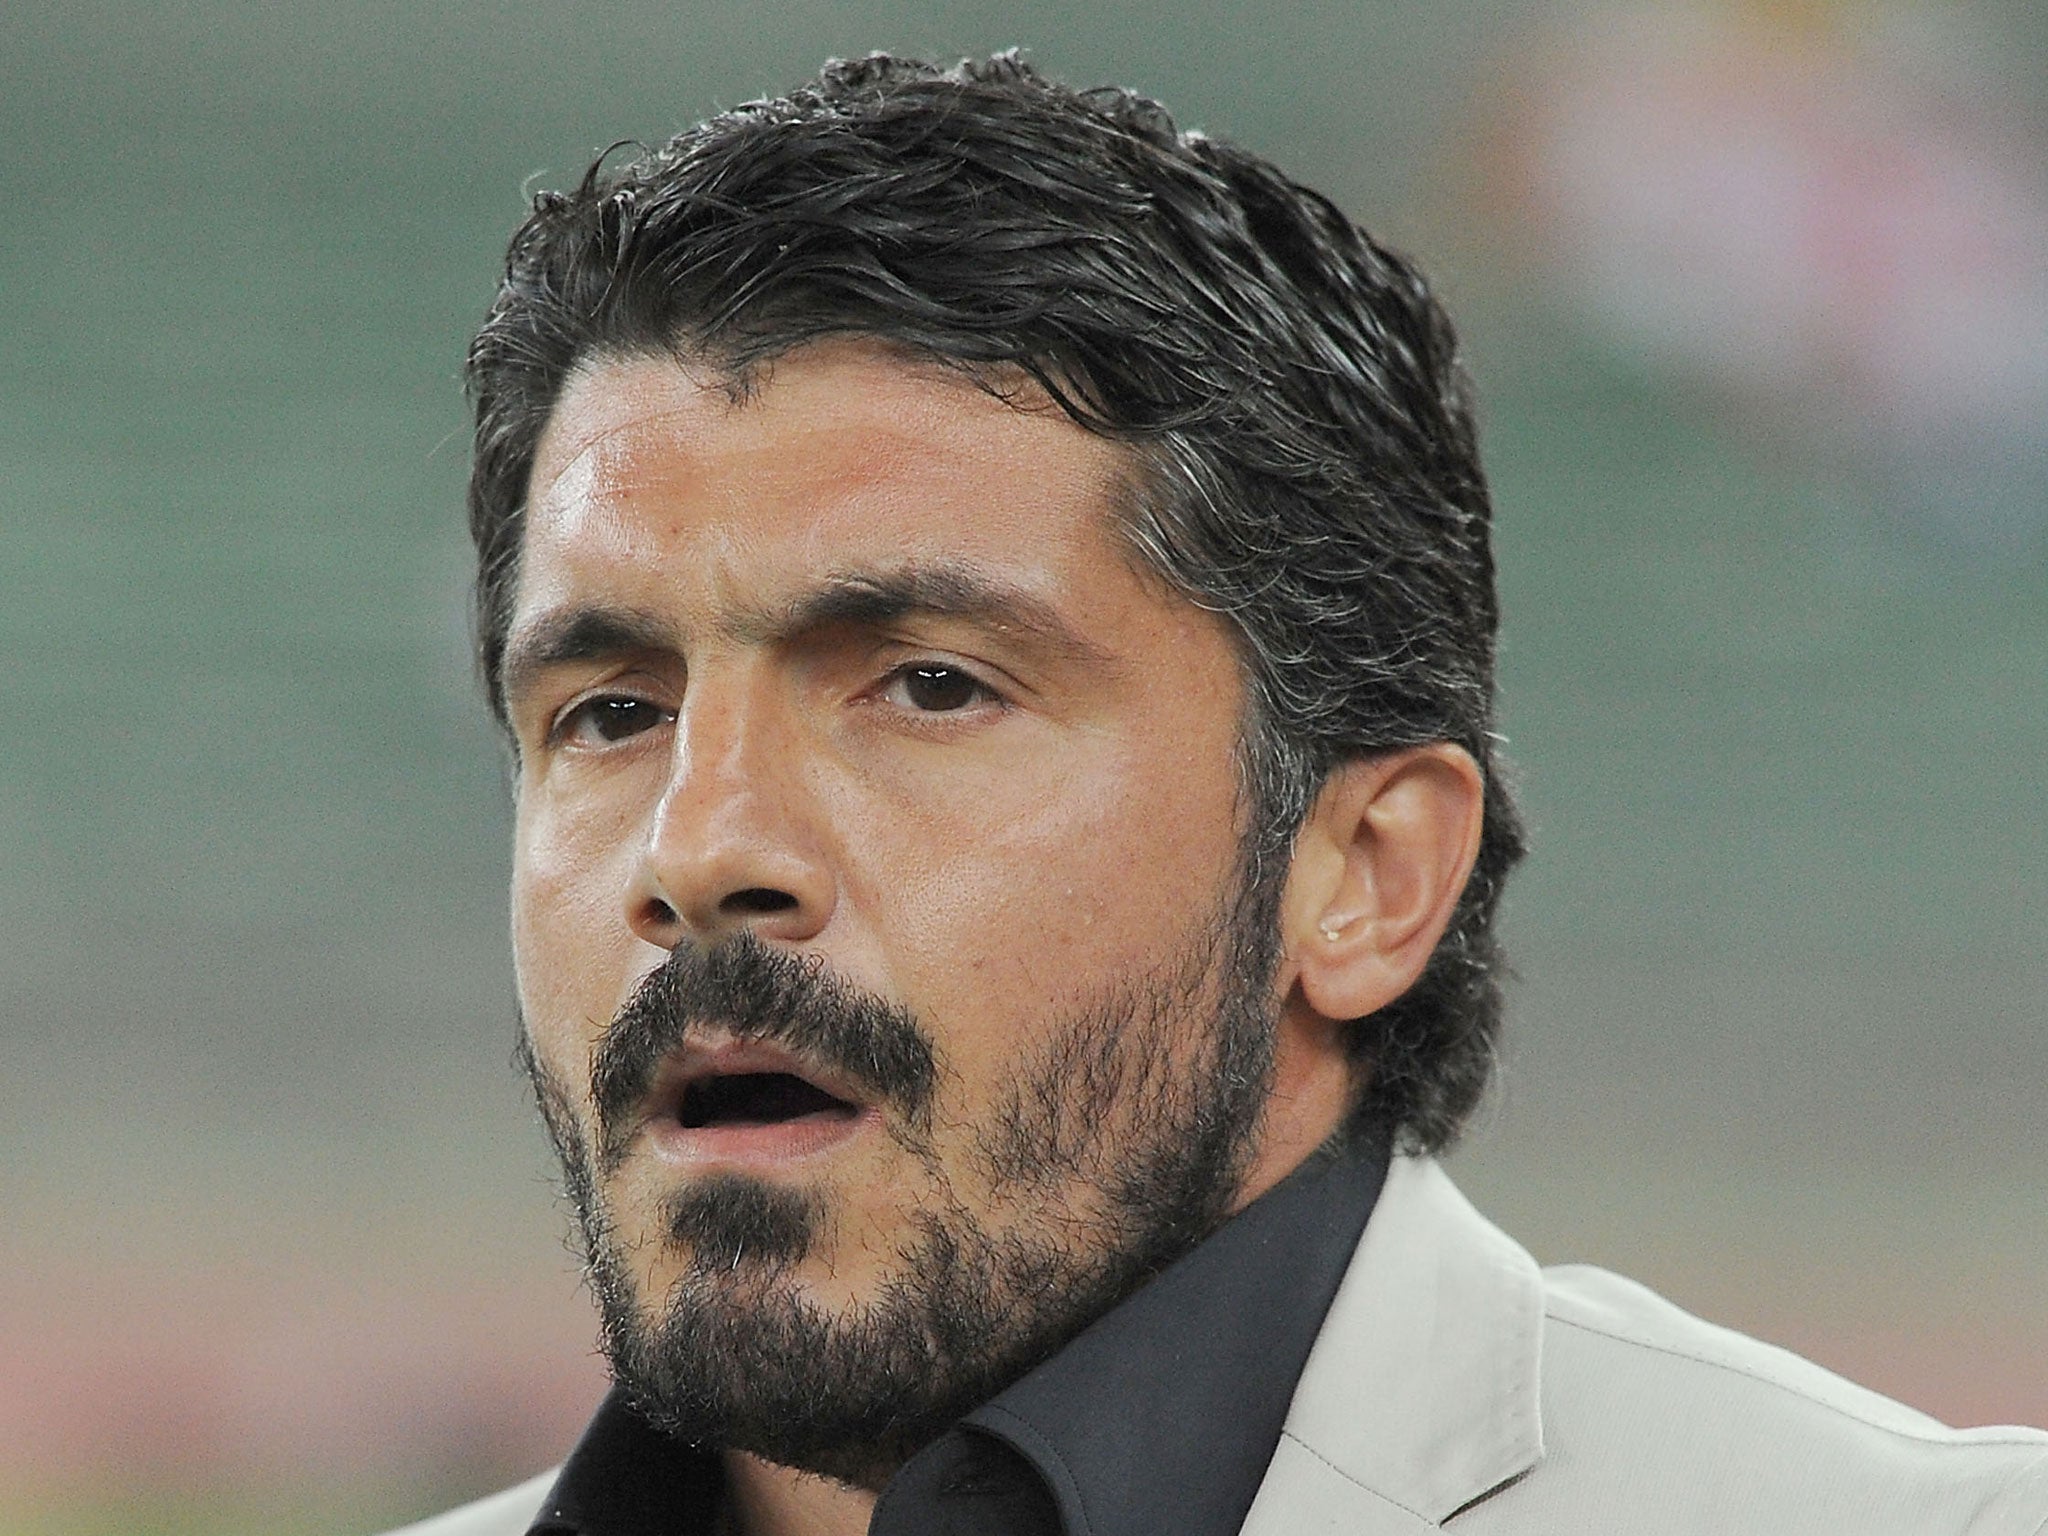 Former Italian midfielder Gennaro Gattuso has claimed he 'can't see a place for women in football'.